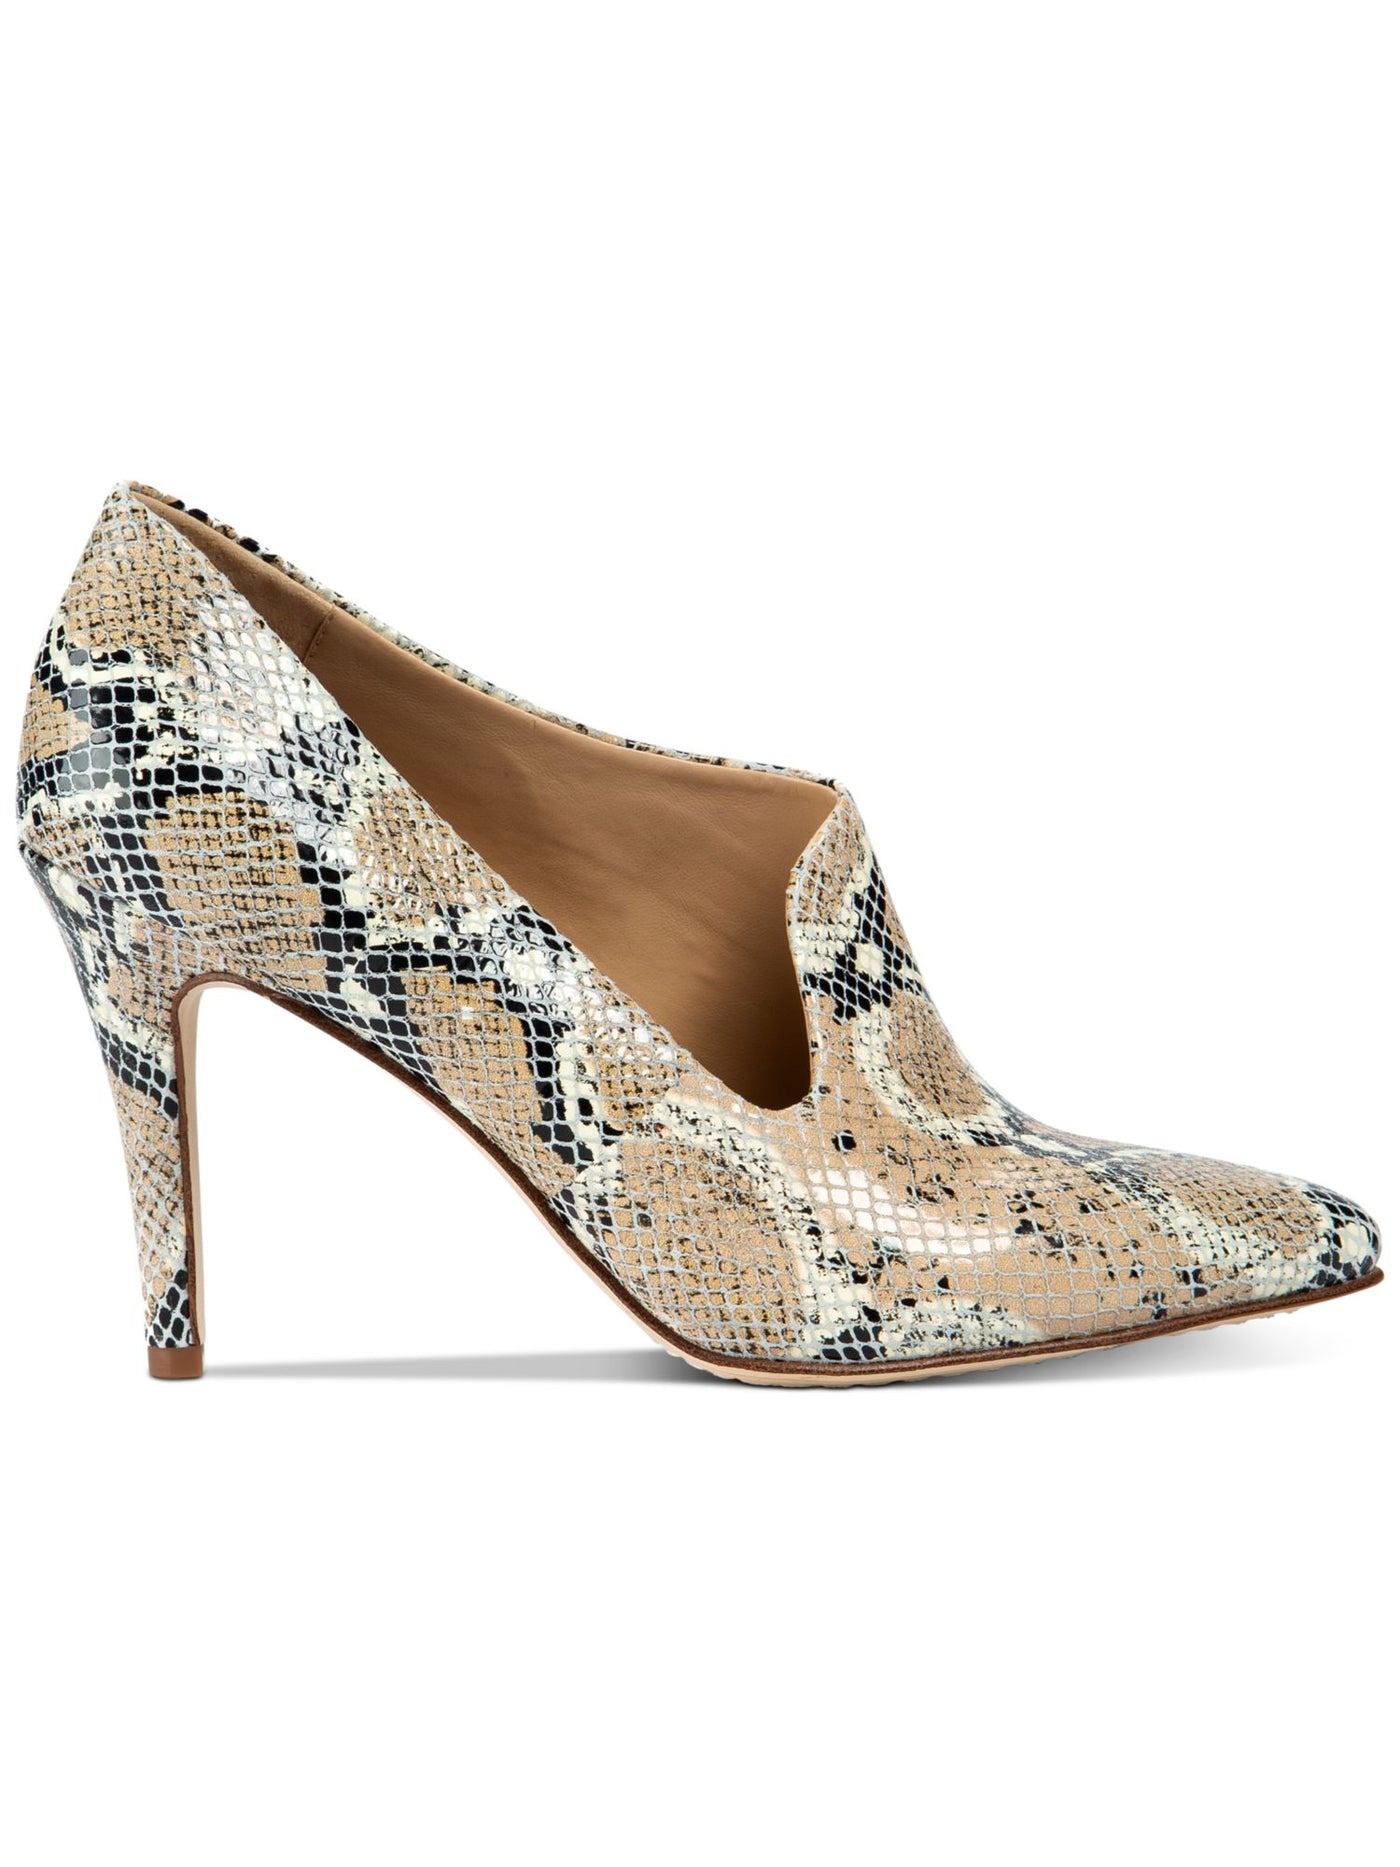 LUCCA LANE Womens Beige Snakeskin Cushioned Asymmetrical Yalexis Pointed Toe Stiletto Slip On Leather Pumps Shoes M